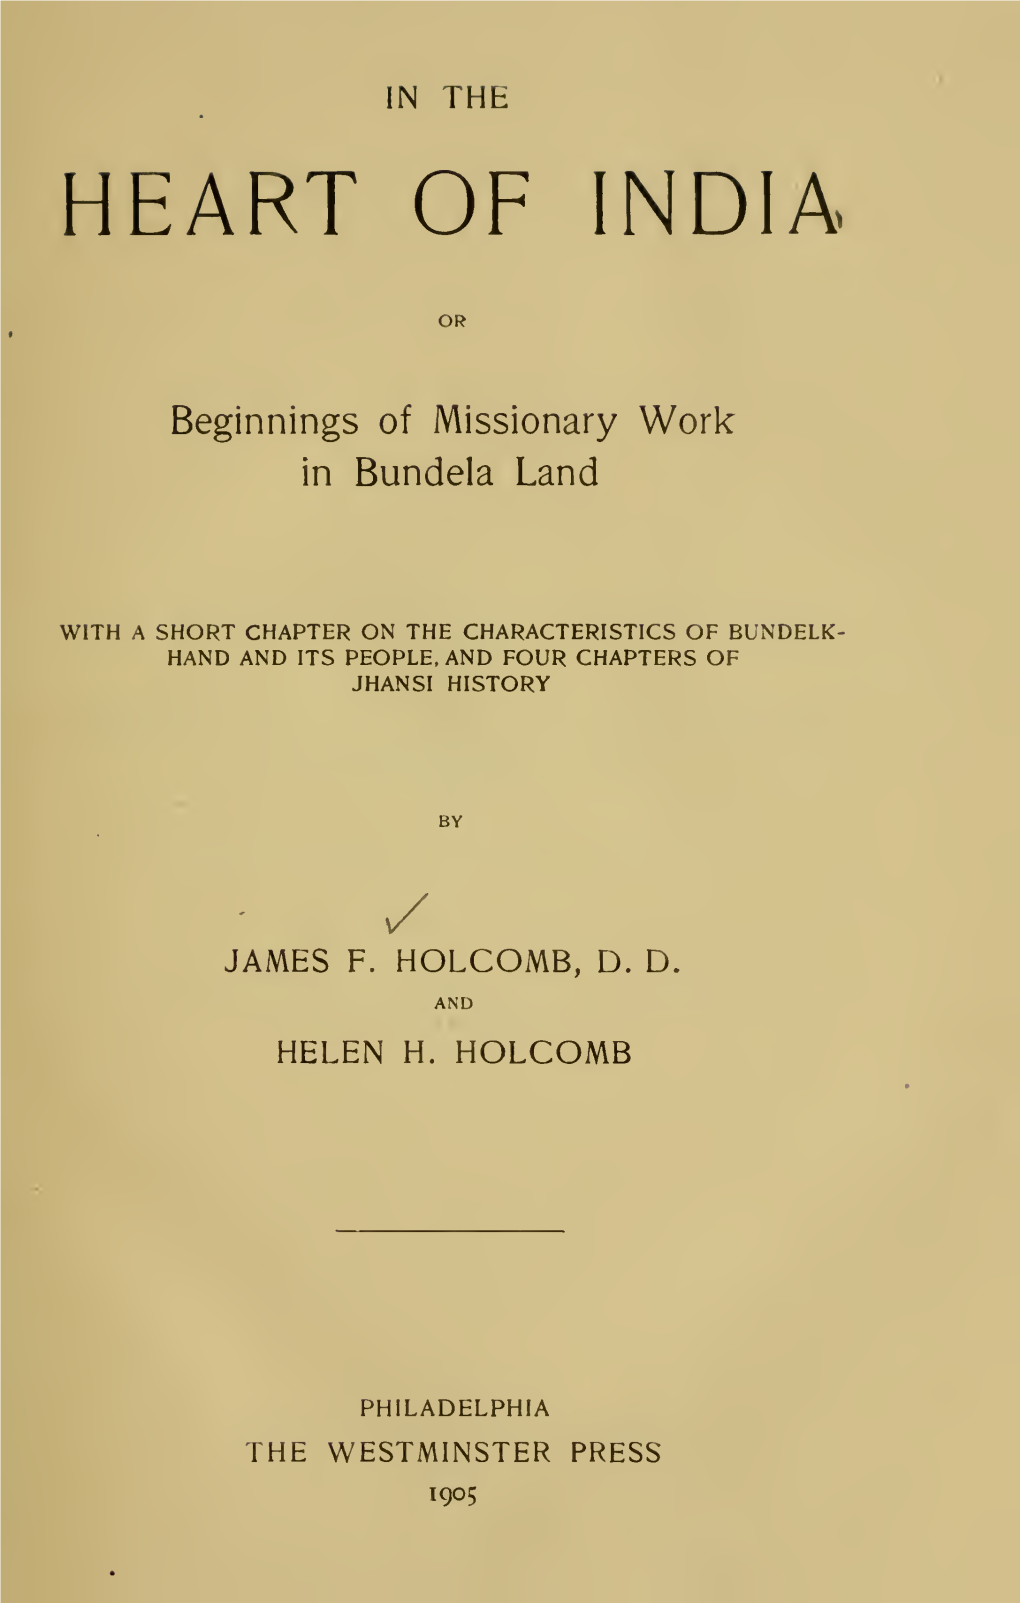 In the Heart of India : Or, Beginnings of Missionary Work in Bundela Land